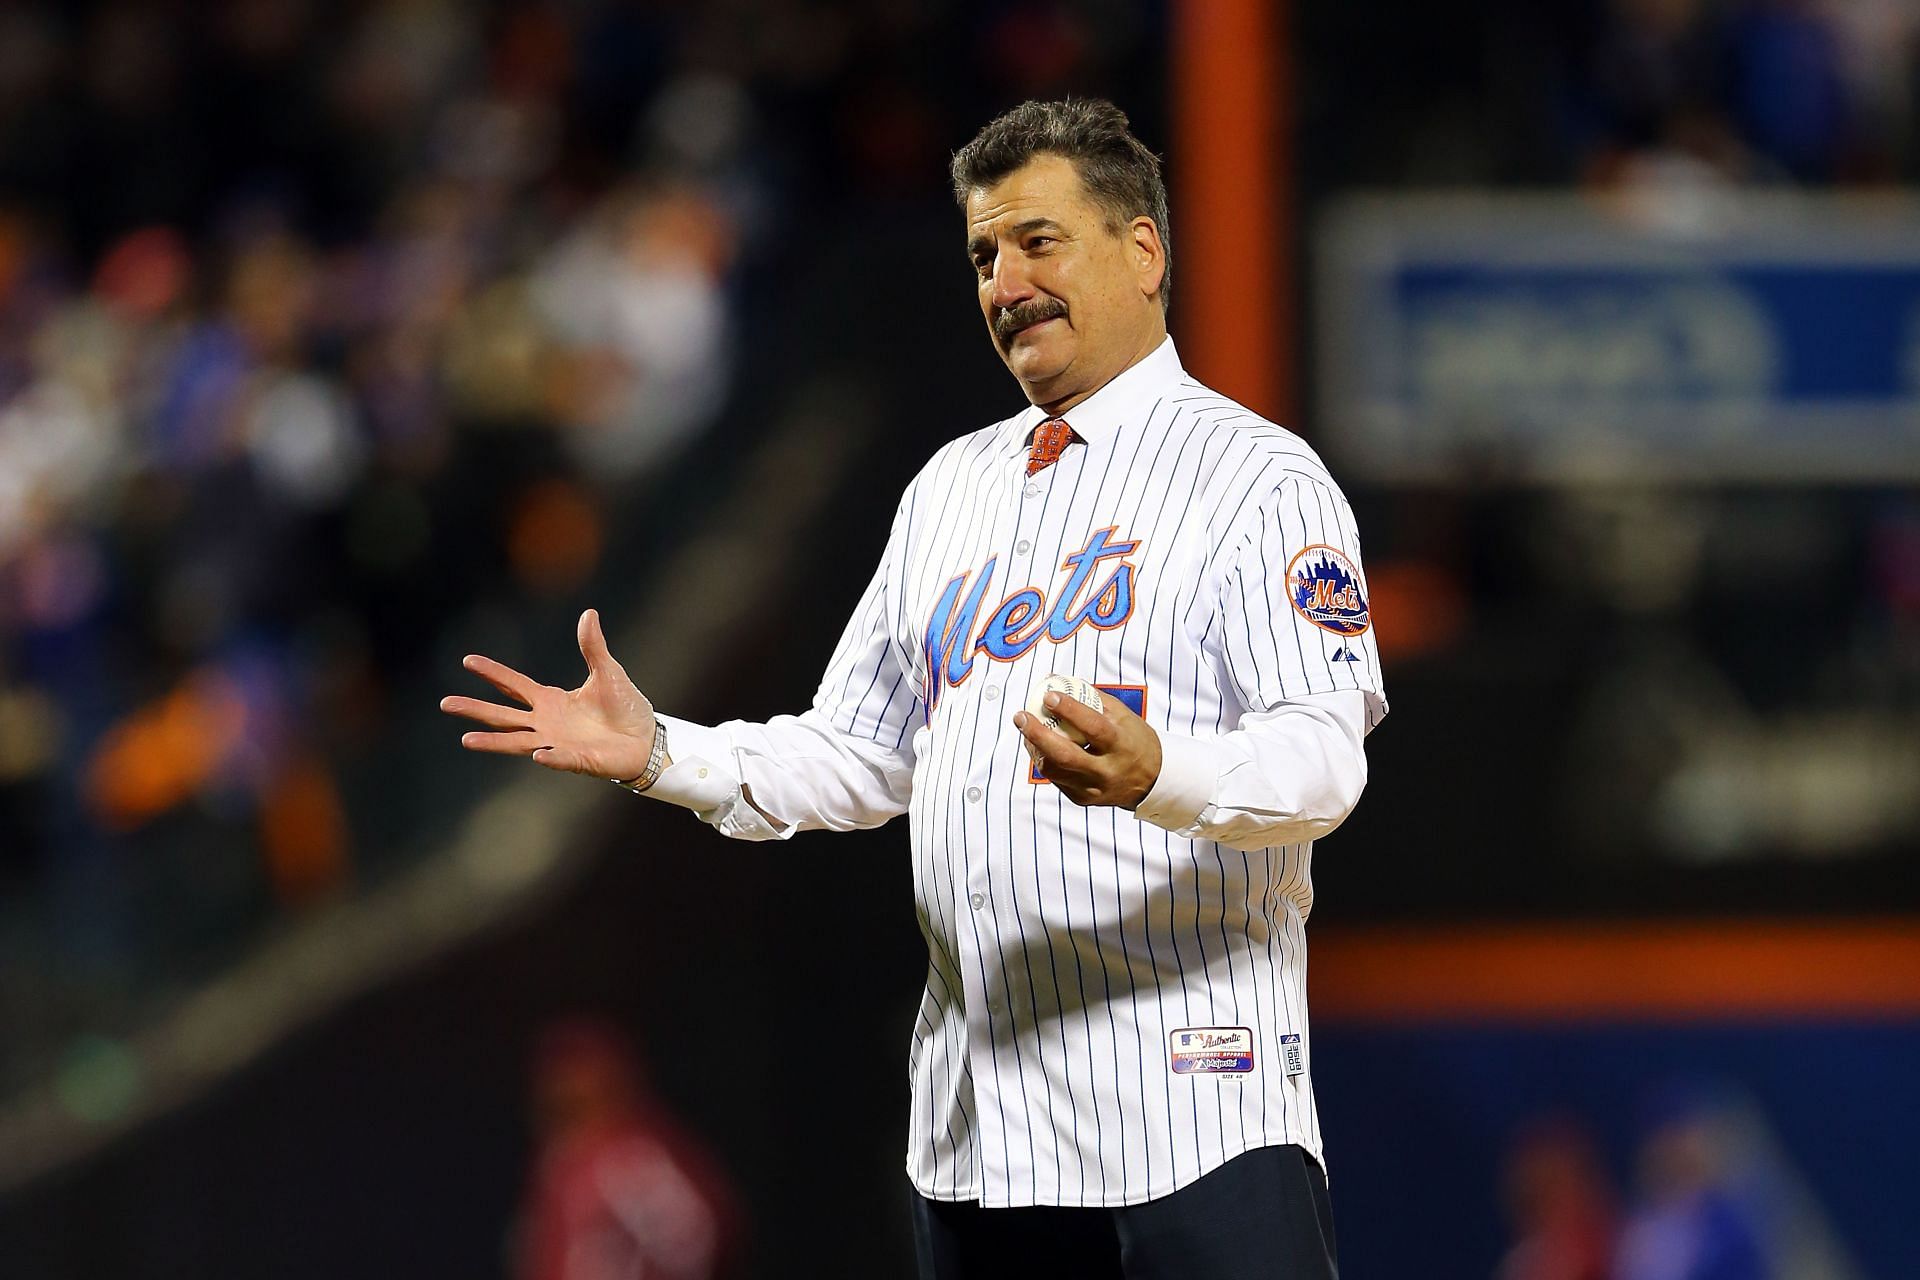 SNY's Keith Hernandez needs shoulder surgery, out for regular season -  Newsday